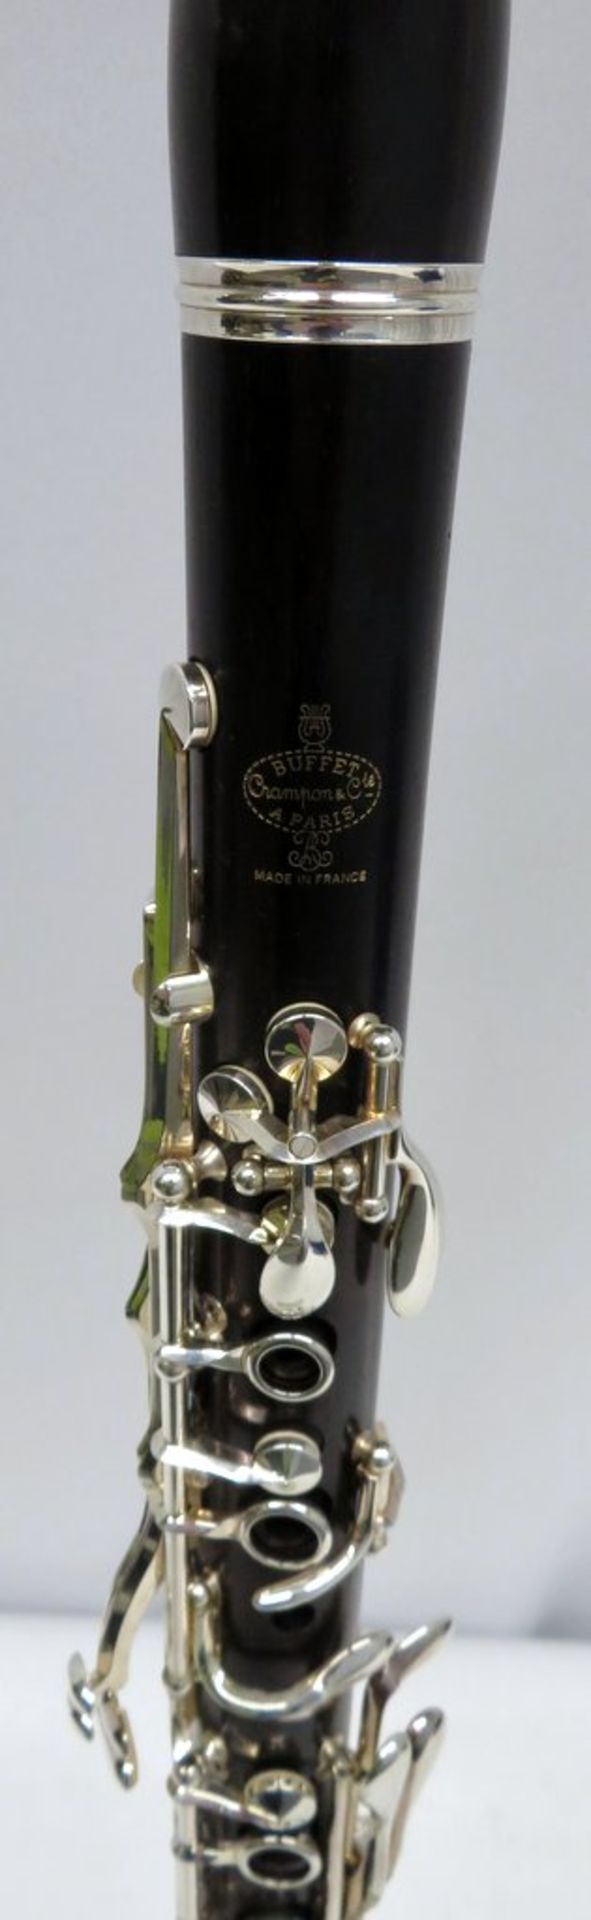 Buffet Crampon Clarinet Complete With Case. - Image 7 of 18